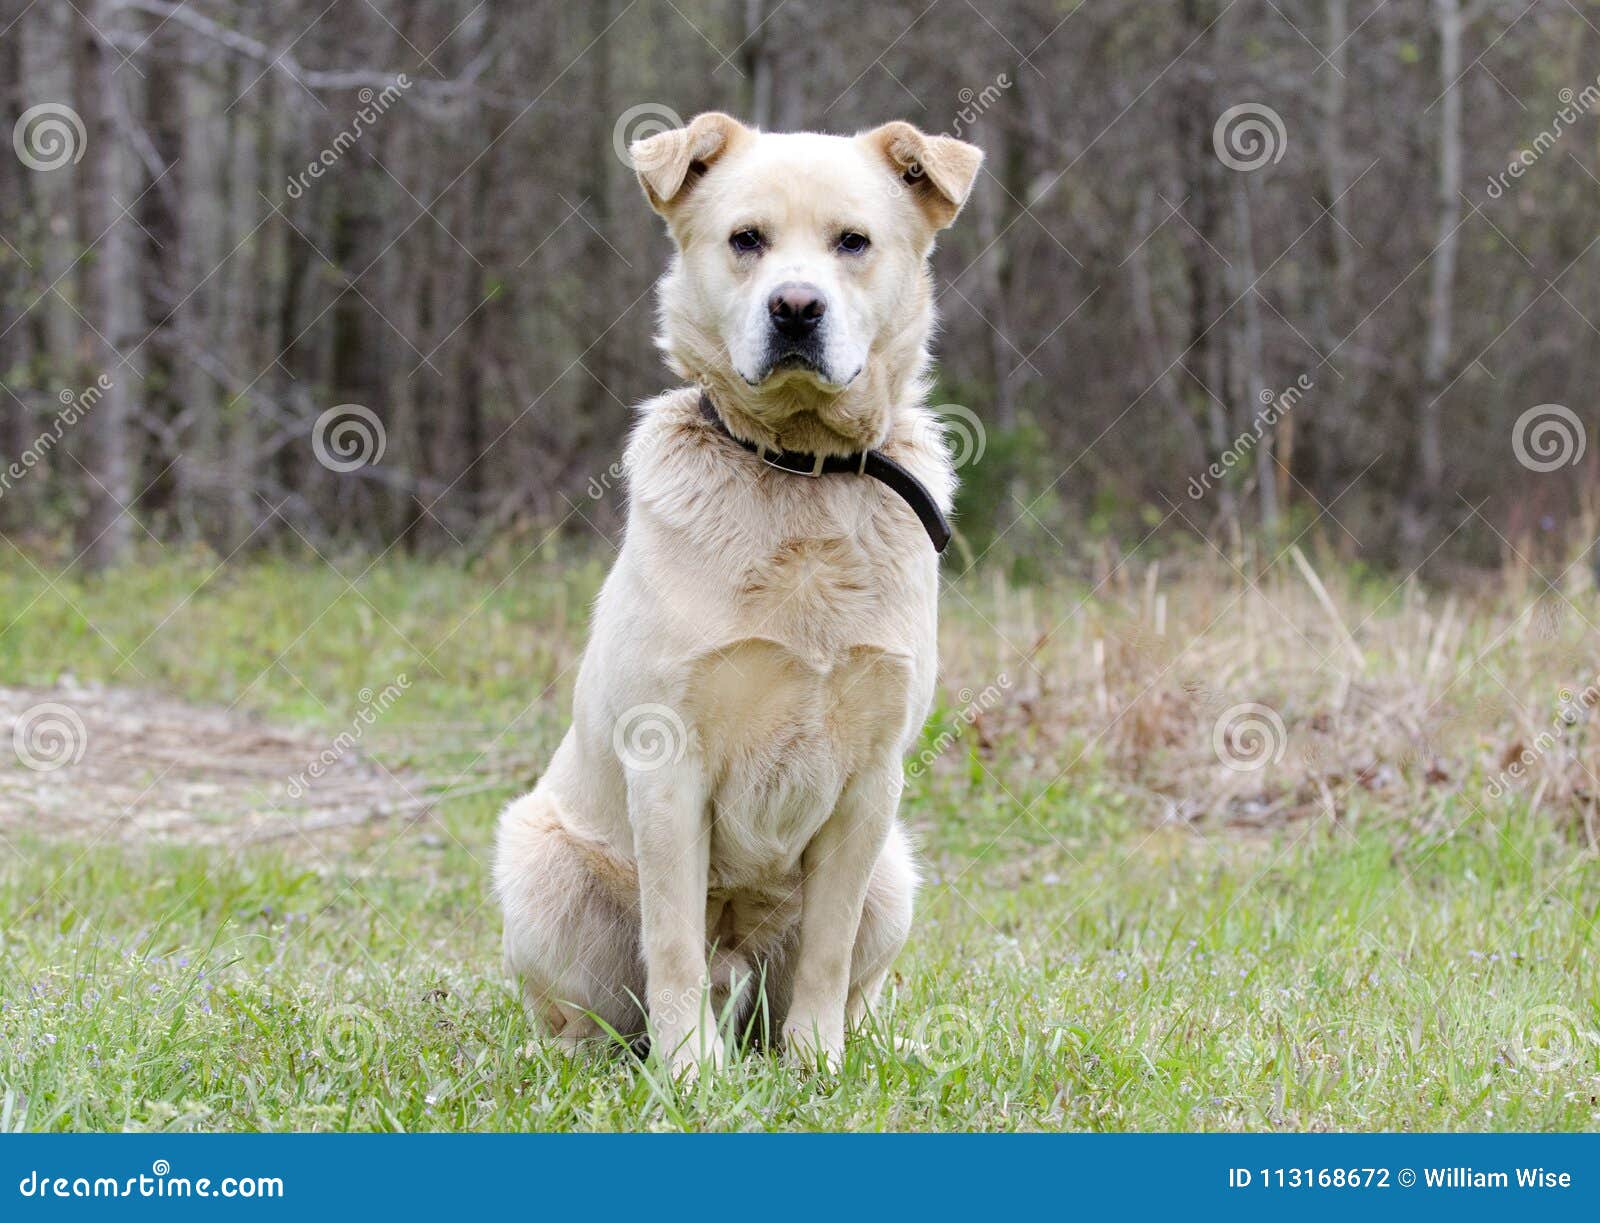 great pyrenees and yellow lab mix